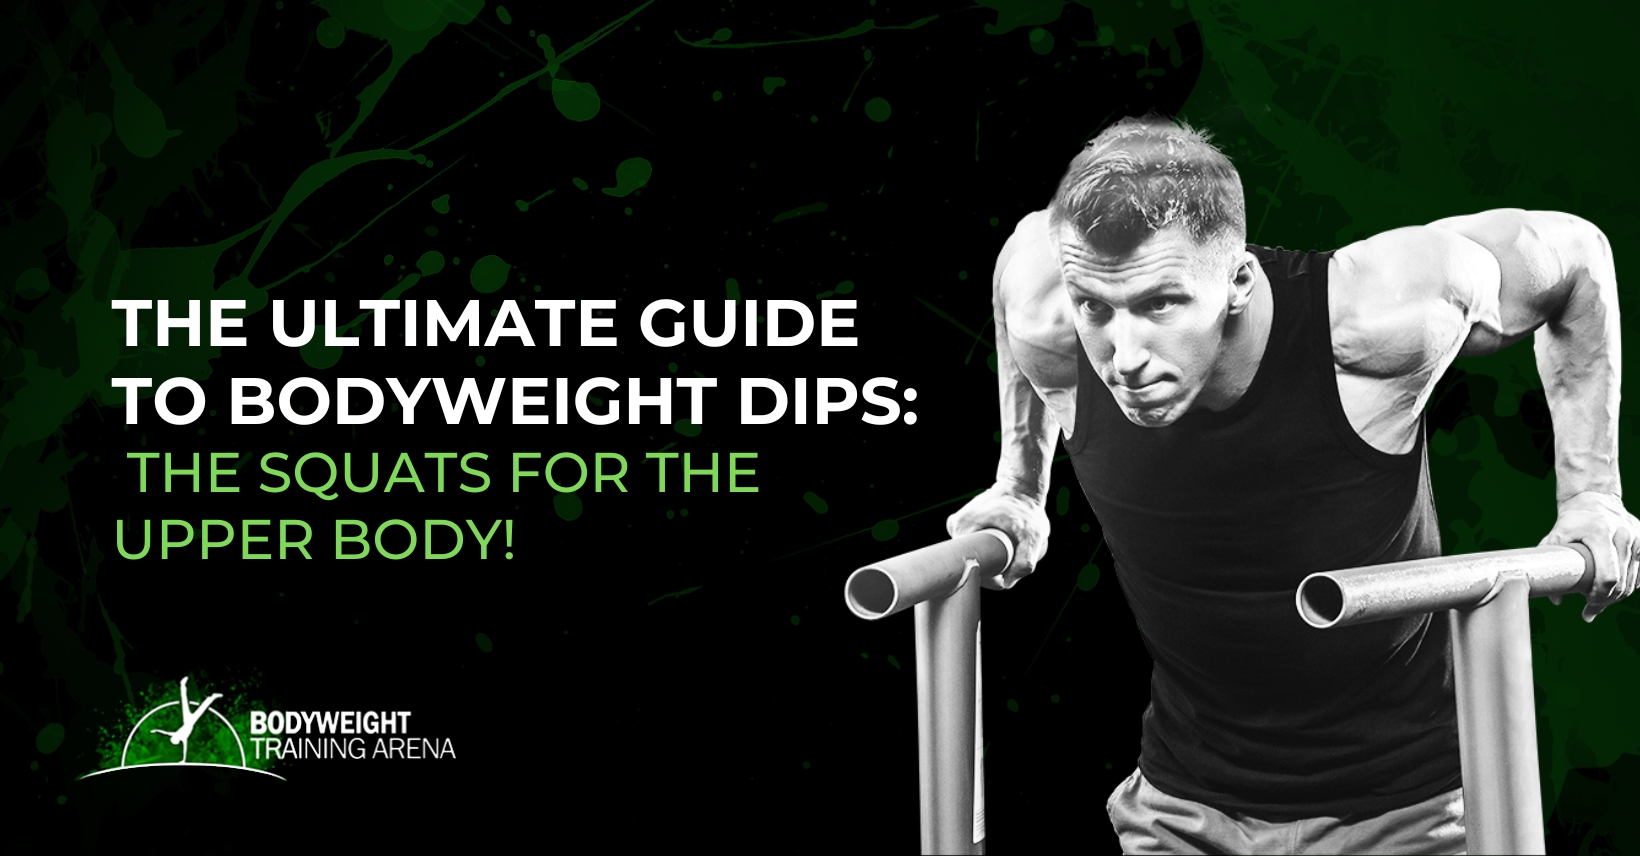 The Ultimate Guide to Bodyweight Dips: The Squats for the Upper Body!